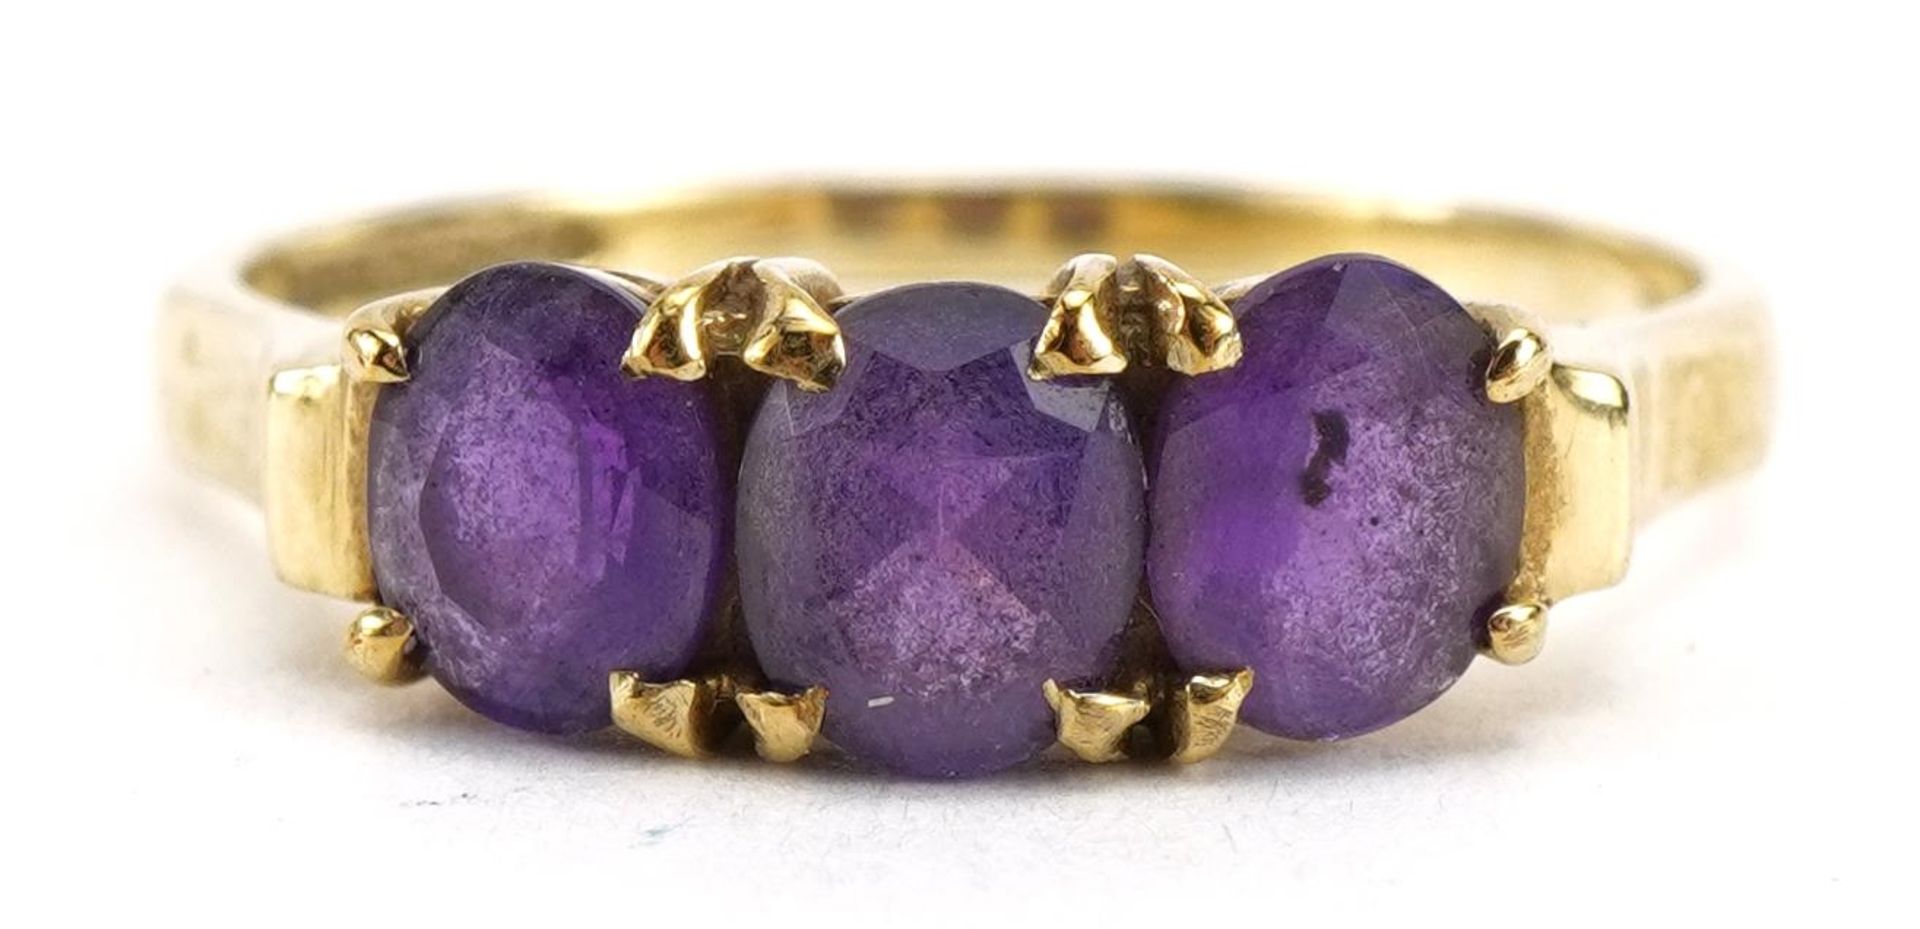 9ct gold amethyst three stone ring, the largest amethyst approximately 5.2mm x 3.8mm, size L, 1.8g